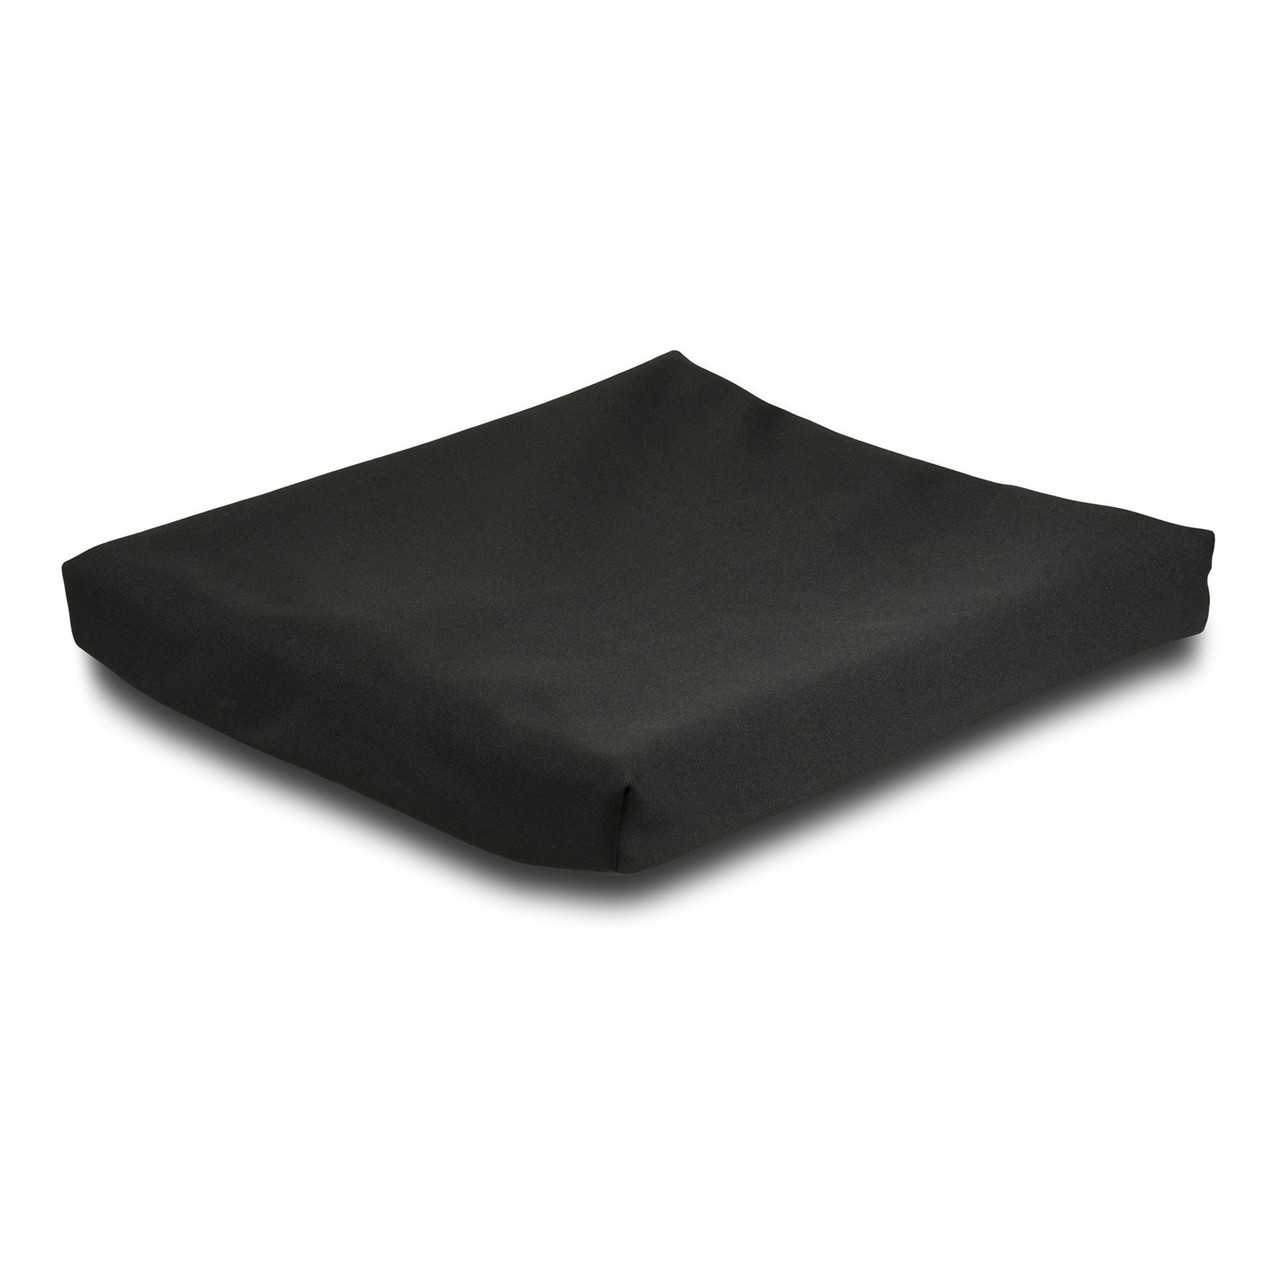 Gel E Seat Cushion - Foam, Nylon/Vinyl Cover, Great for Wheelchairs - 18 in  x 16 in x 3 in - Simply Medical